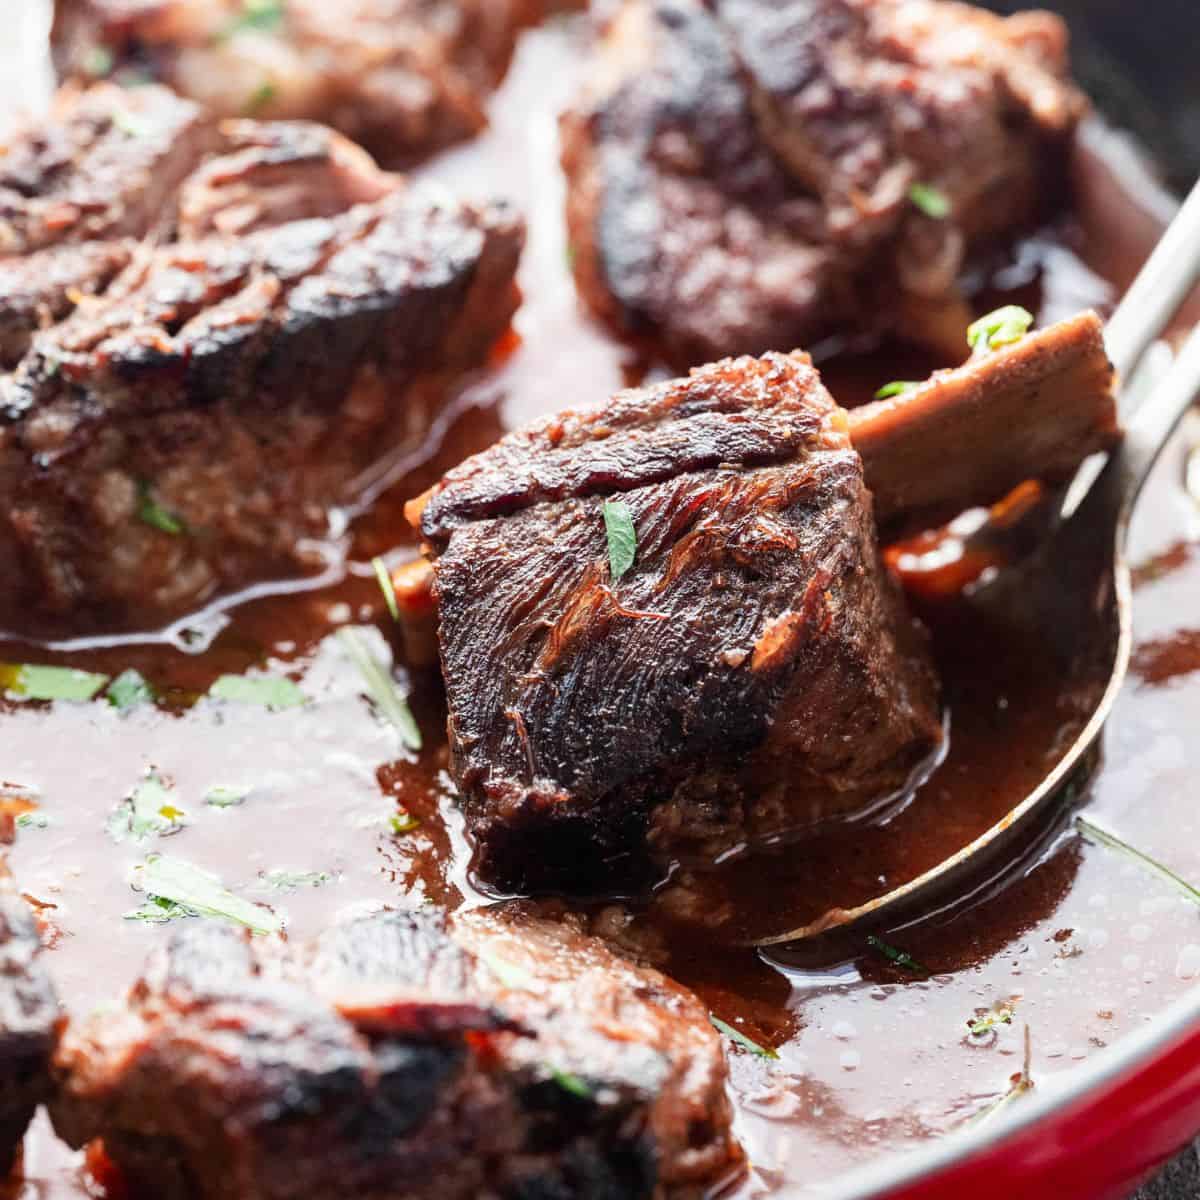 Italian braised short ribs in tomato sauce hero image.  Up close image of a short rib on a spoon. 